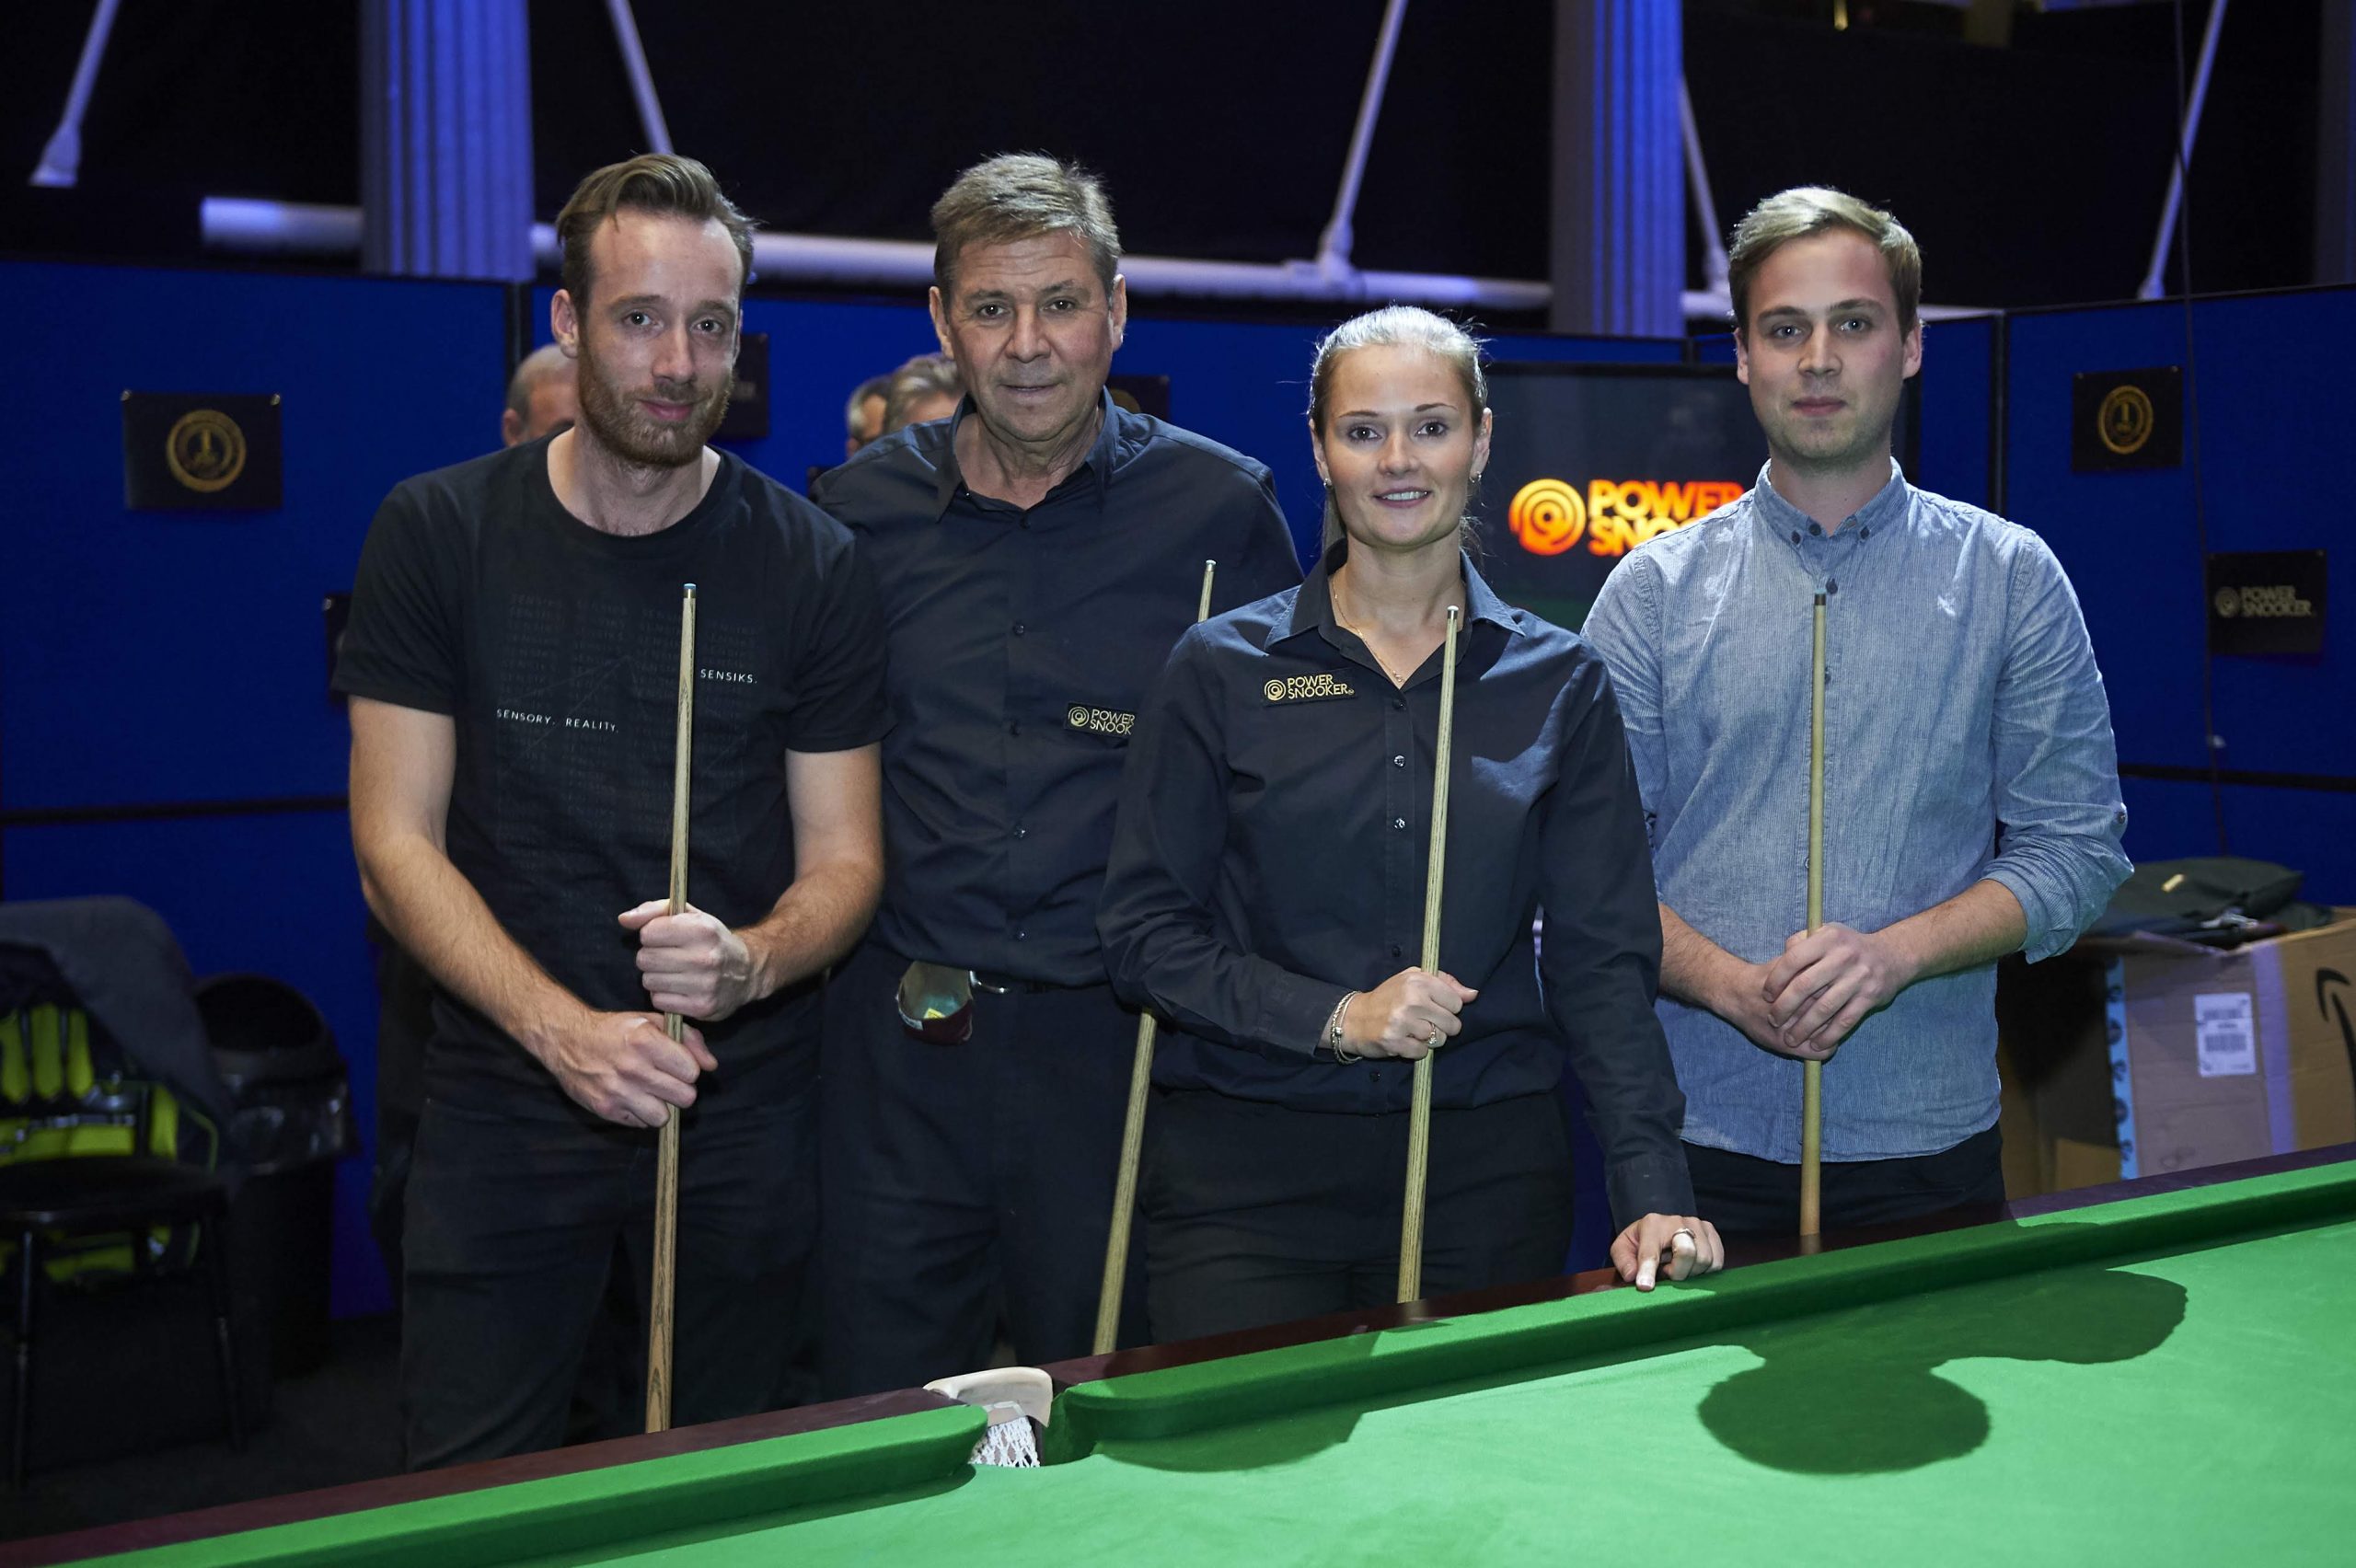 How Power Snooker plans to change and complement today’s snooker world